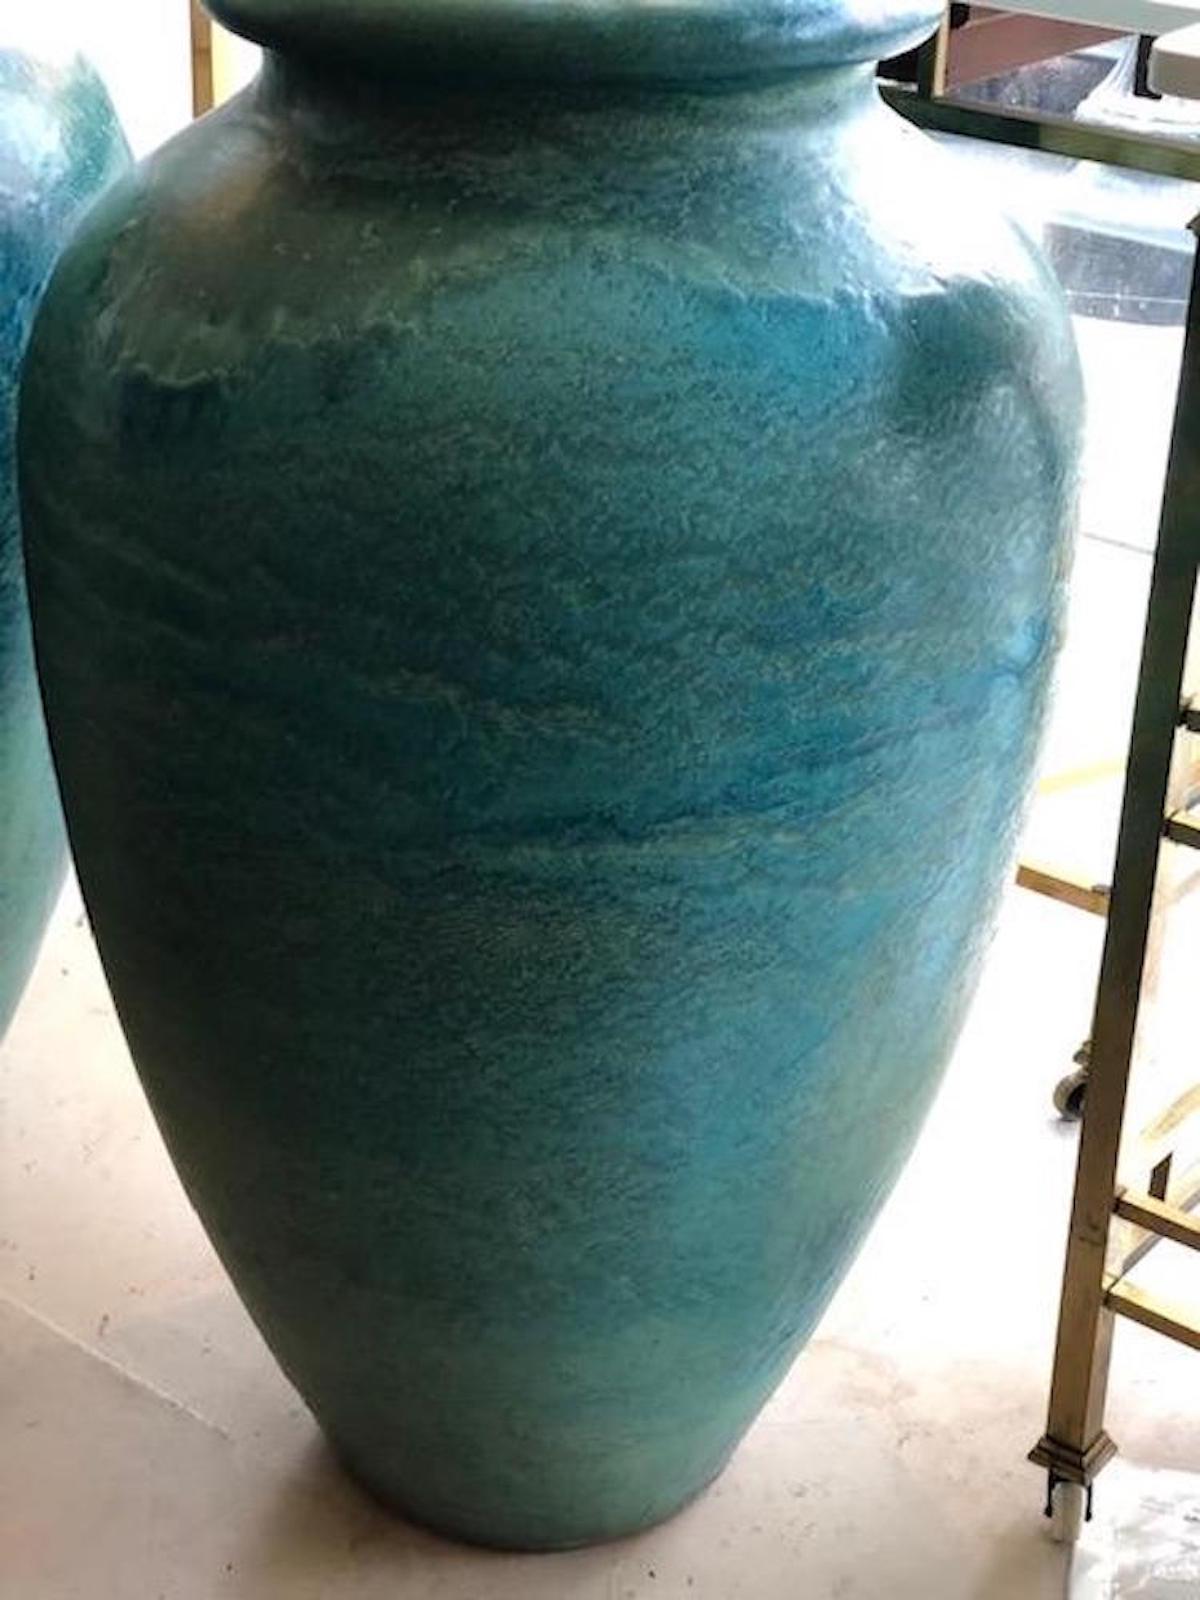 The Galloway terra cotta co founded in Philadelphia at the turn of the century, created these jars in the 1920s exquisite shades of turquoise. Very large scale measuring 36 inches tall. Drainage spout near bottom rim.